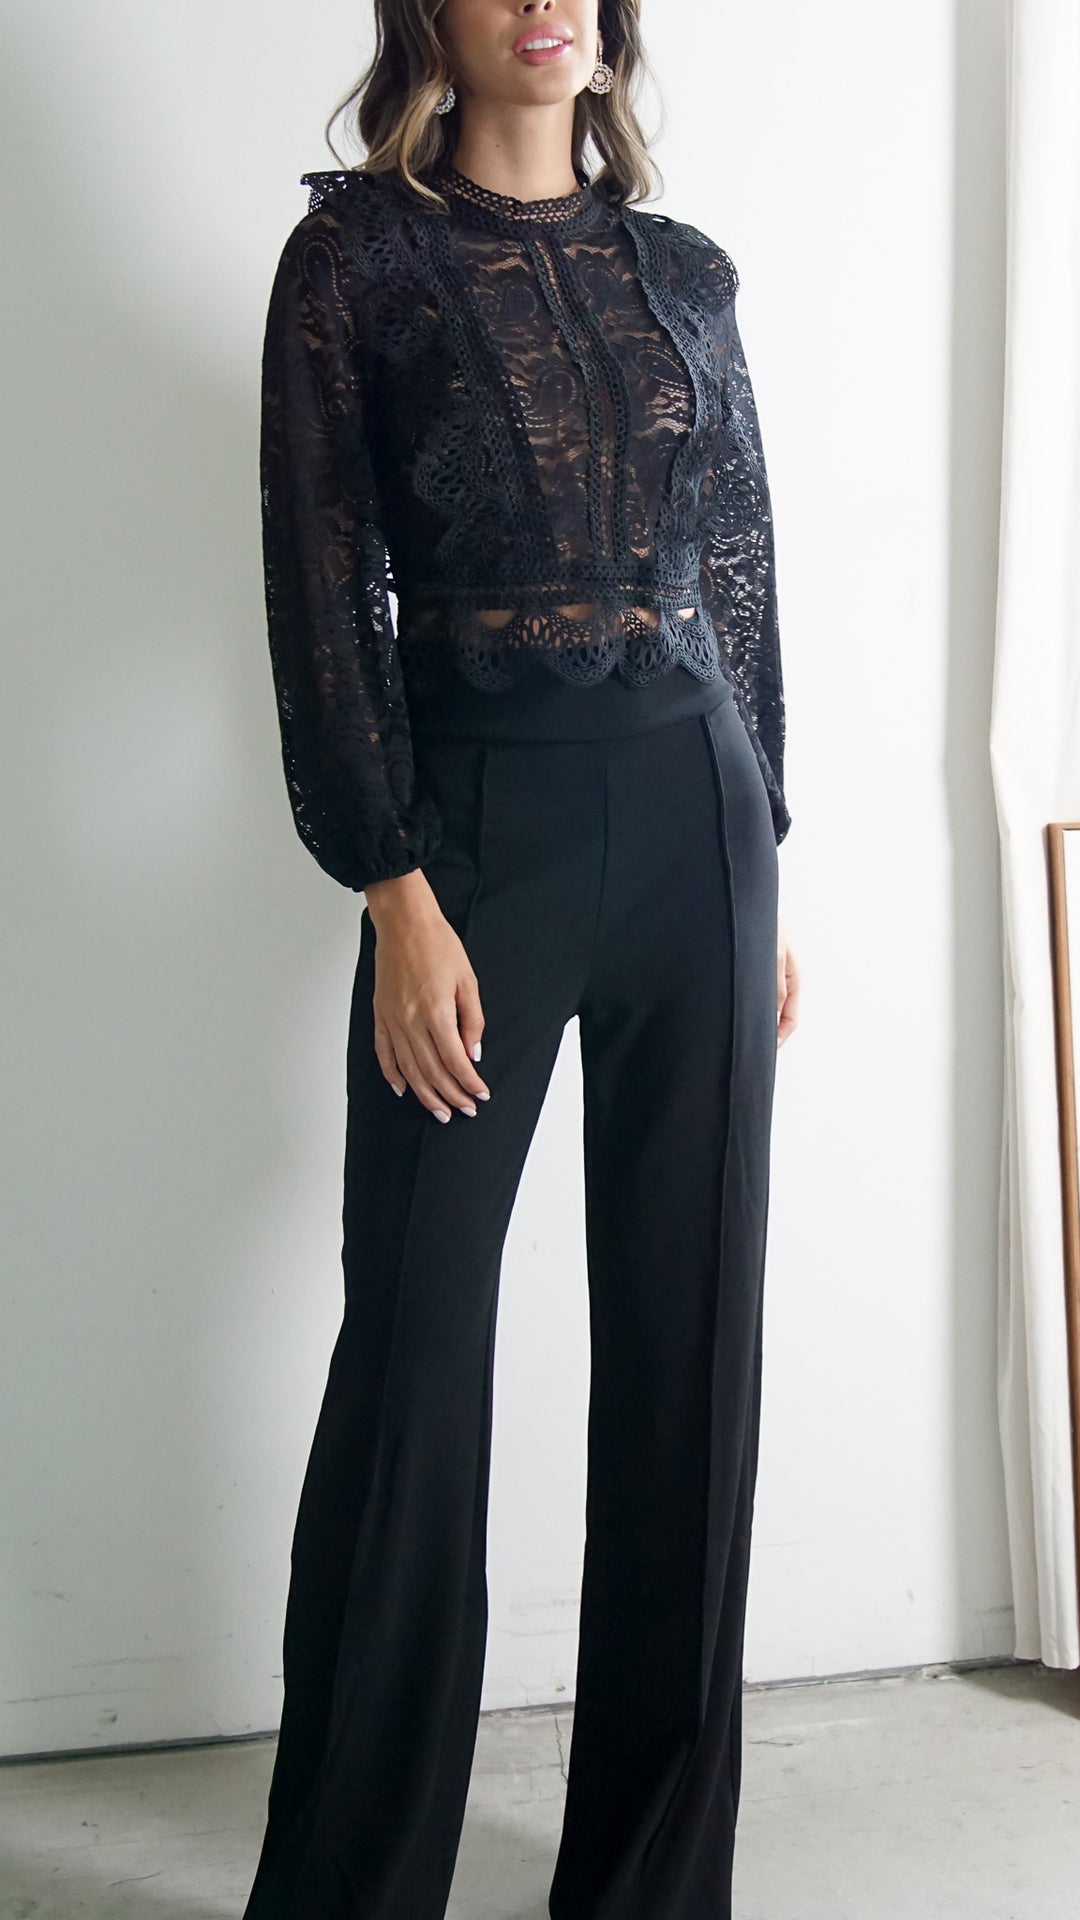 Frenzy Lace Top in Black - Steps New York